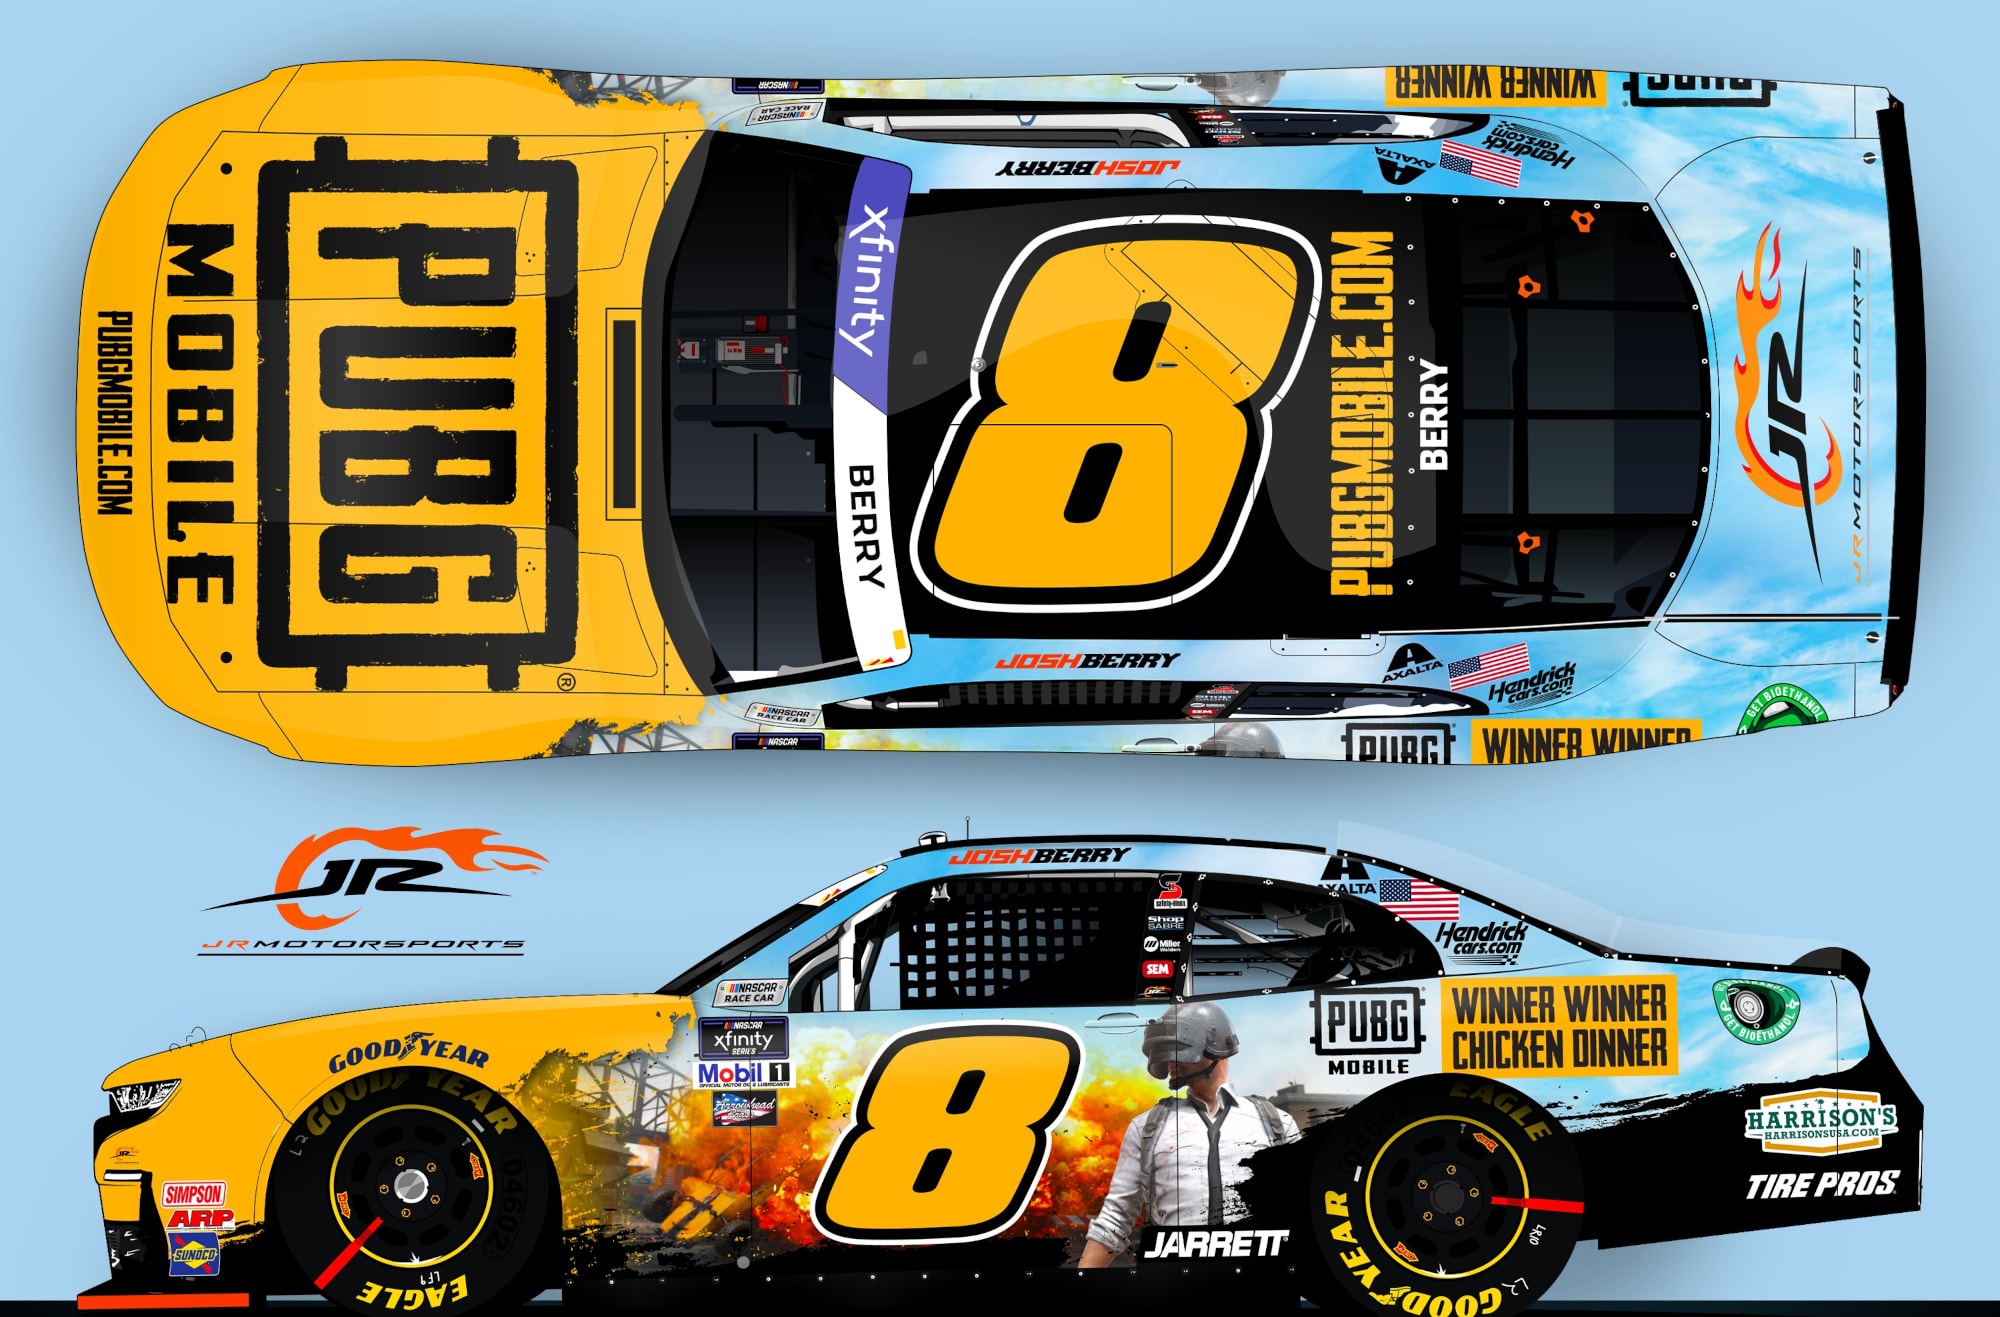 Popular Mobile Game Has Its Logo Emblazoned on a NASCAR Race Car